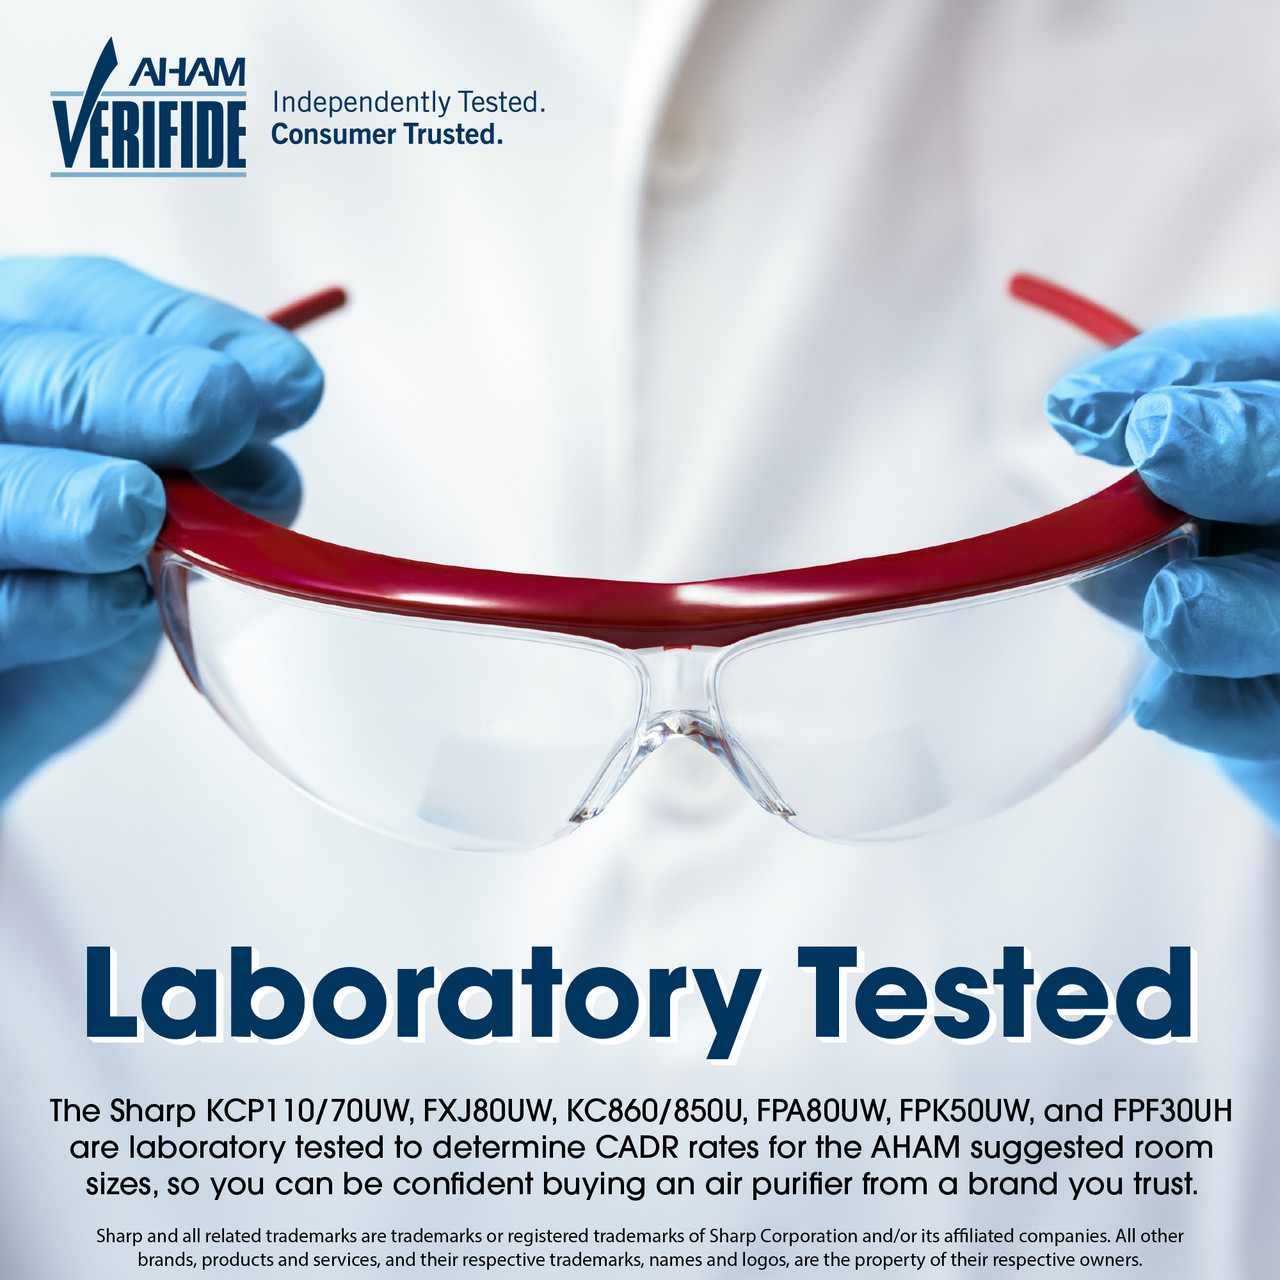 AHAM VERIFIDE
Independently Tested. Consumer Trusted.
Laboratory Tested
The Sharp KCP110/70UW, FXJ80UW, KC860/850U, FPA80UW, FPK50UW, and FPF30UH are laboratory tested to determine CADR rates for the AHAM suggested room sizes, so you can be confident buying an air purifier from a brand you trust. Sharp and all related trademarks are trademarks or registered trademarks of Sharp Corporation and/or its affiliated companies. All other brands, products and services, and their respective trademarks, names and logos, are the property of their respective owners
KCP70UW